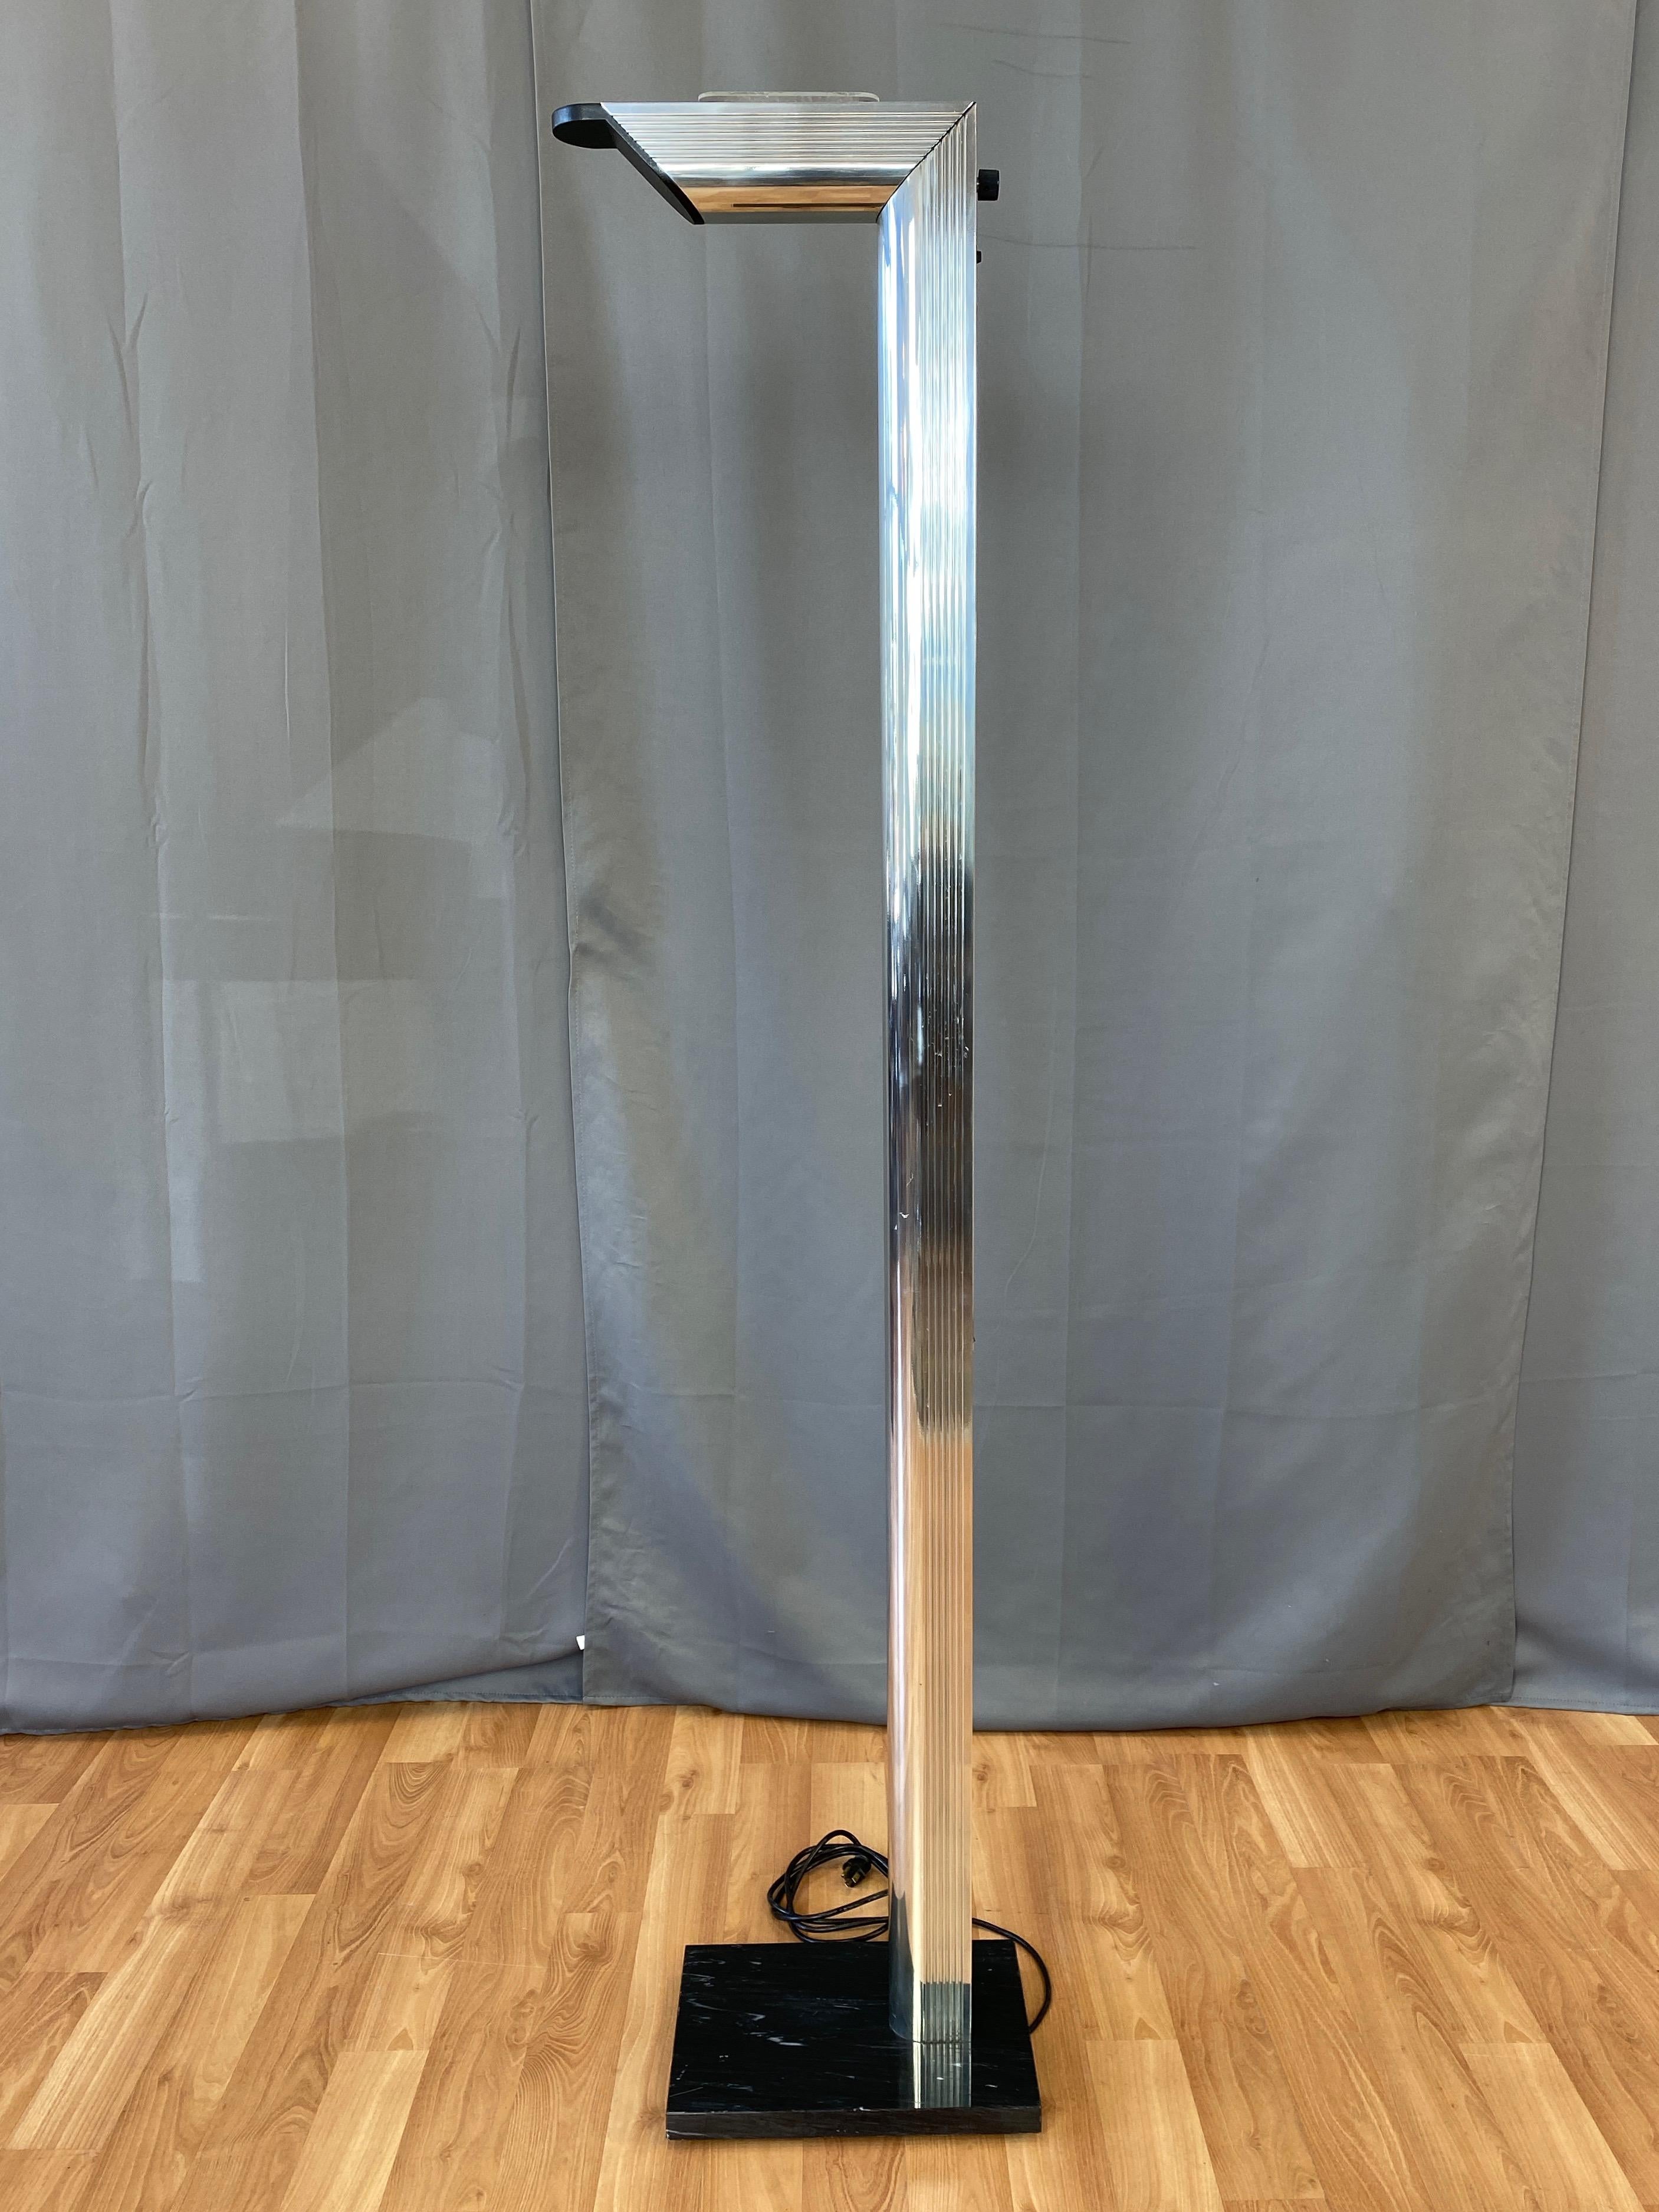 A very cool and uncommon 1980s postmodern chrome two-light torchiere floor lamp with black marble base.

Minimalist architectural aluminum body with chrome finish and black enameled trim stands tall like some futuristic periscope sentry. Features